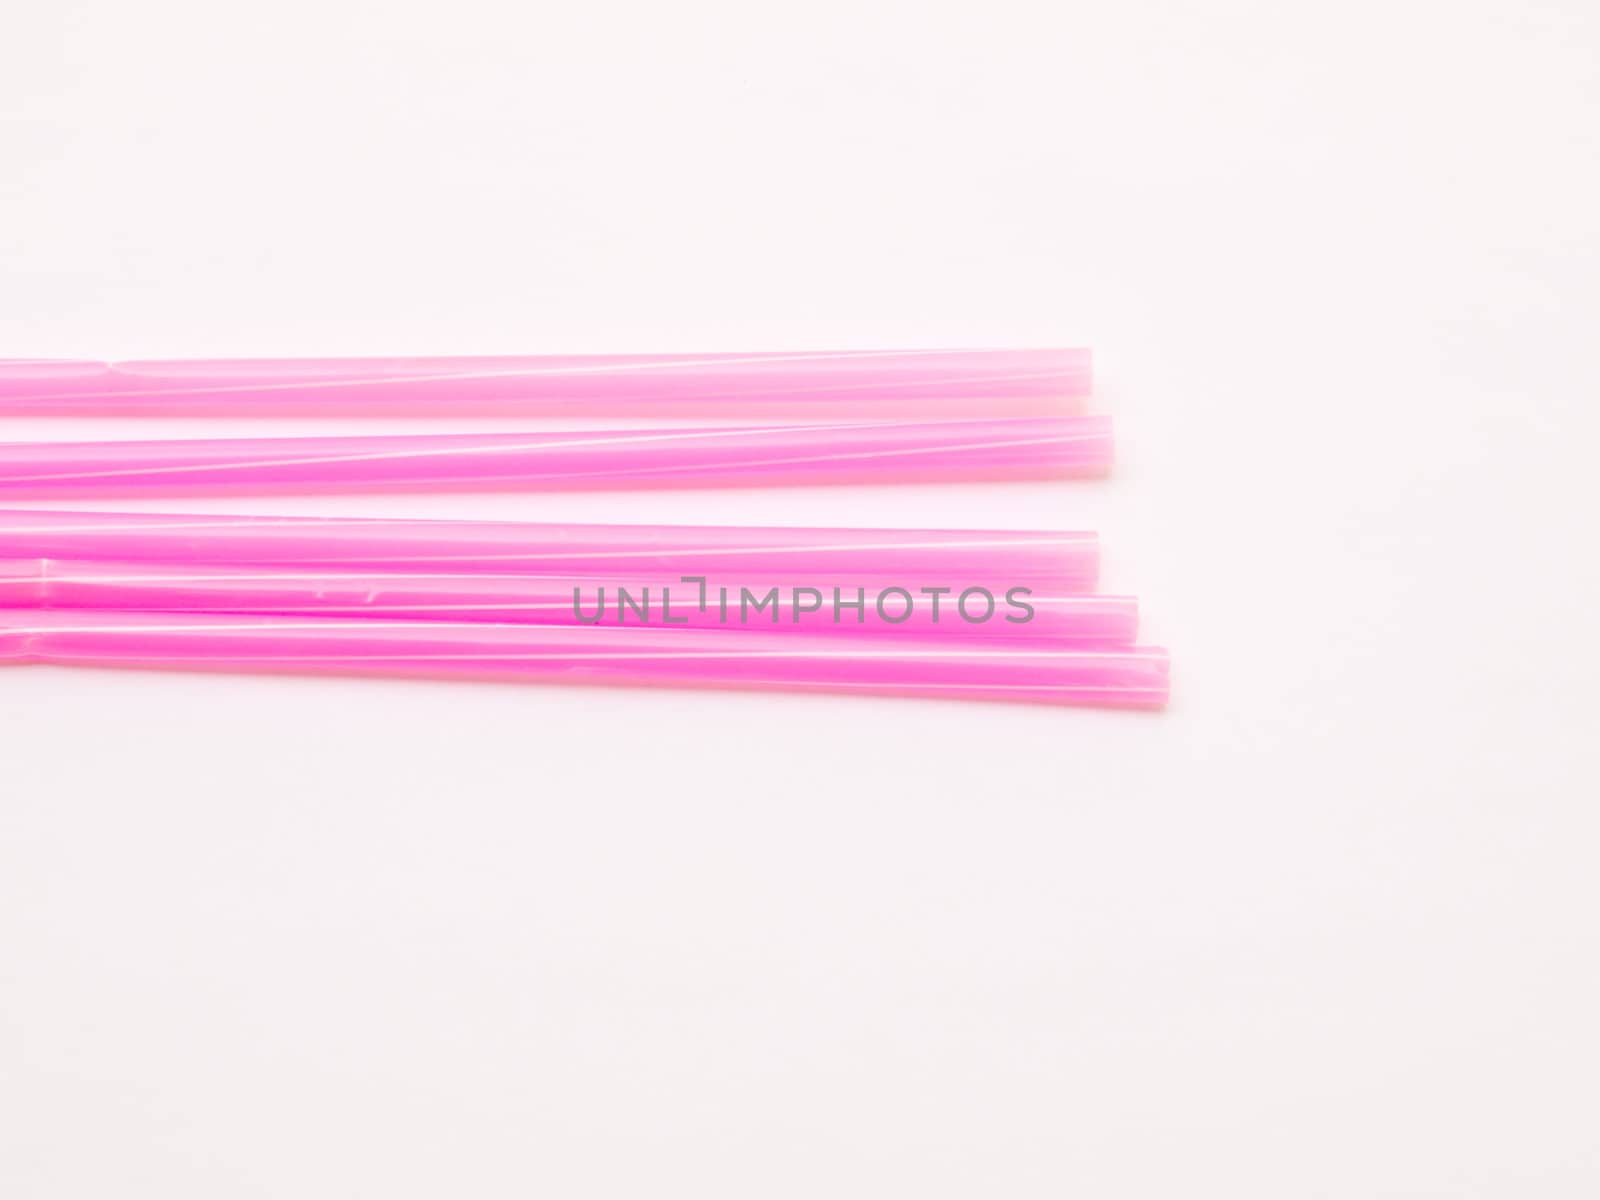 Pink straws isolated on white background